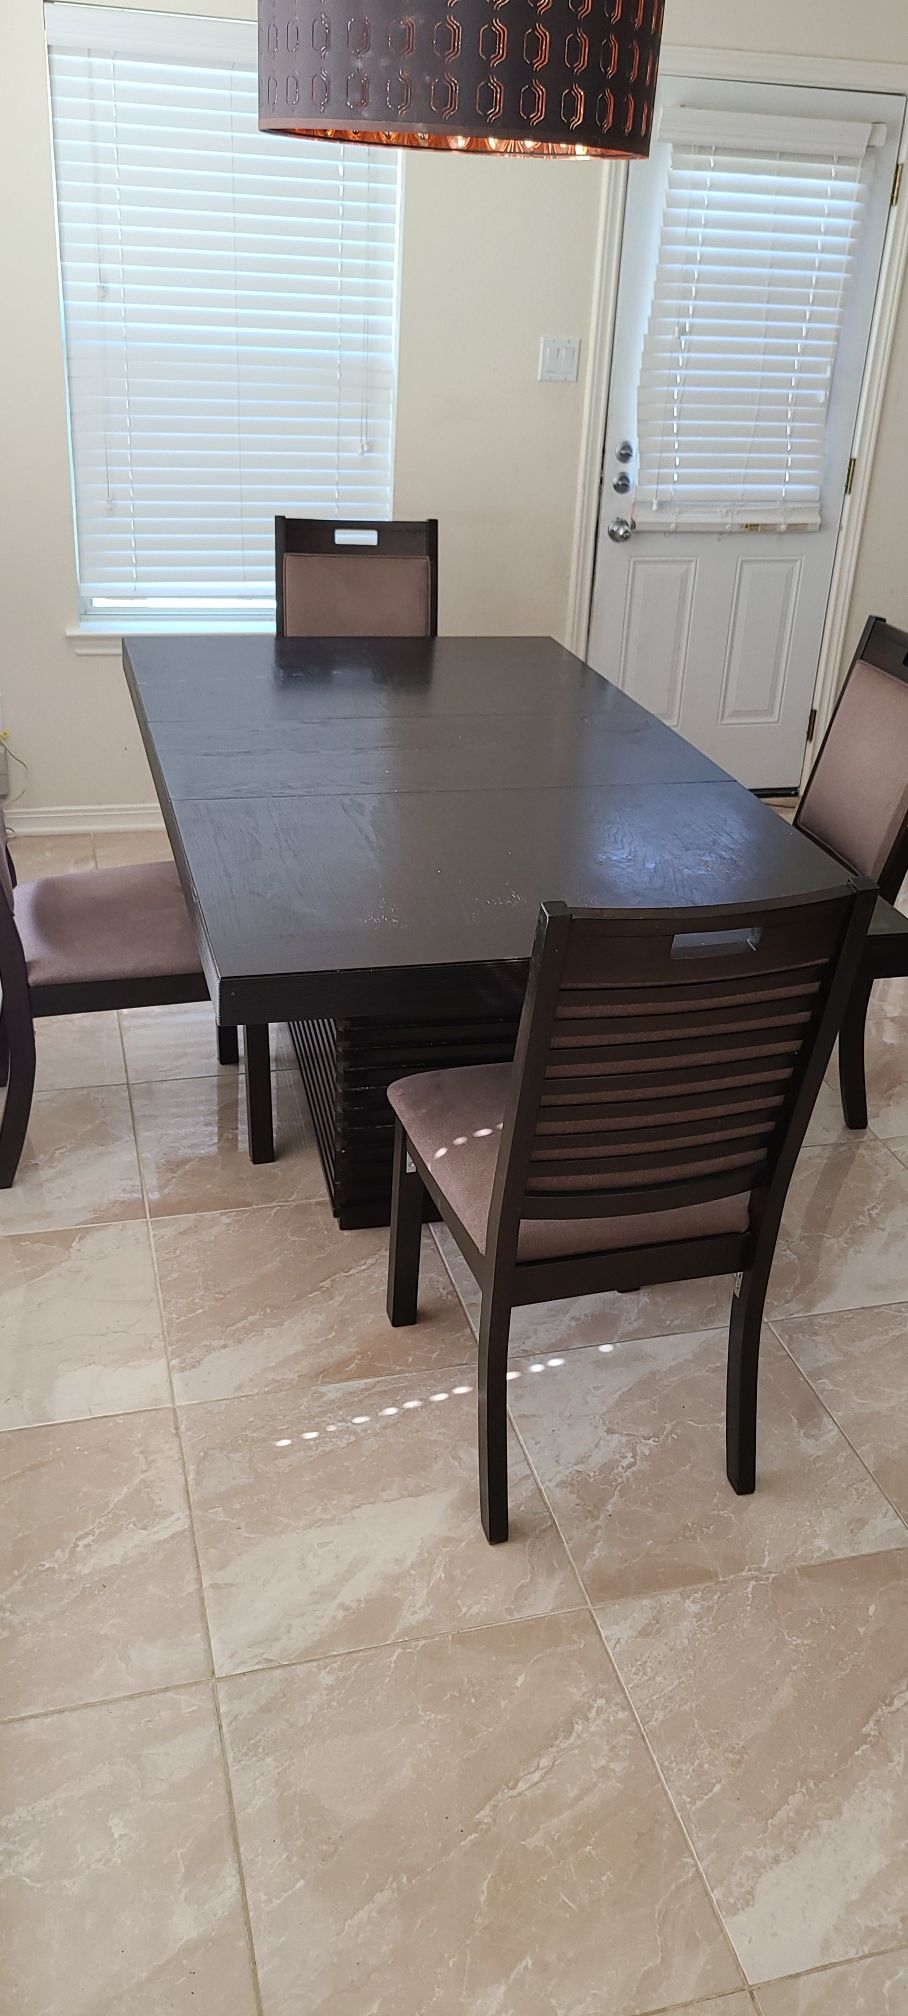 Dinning set table chairs heavy duty